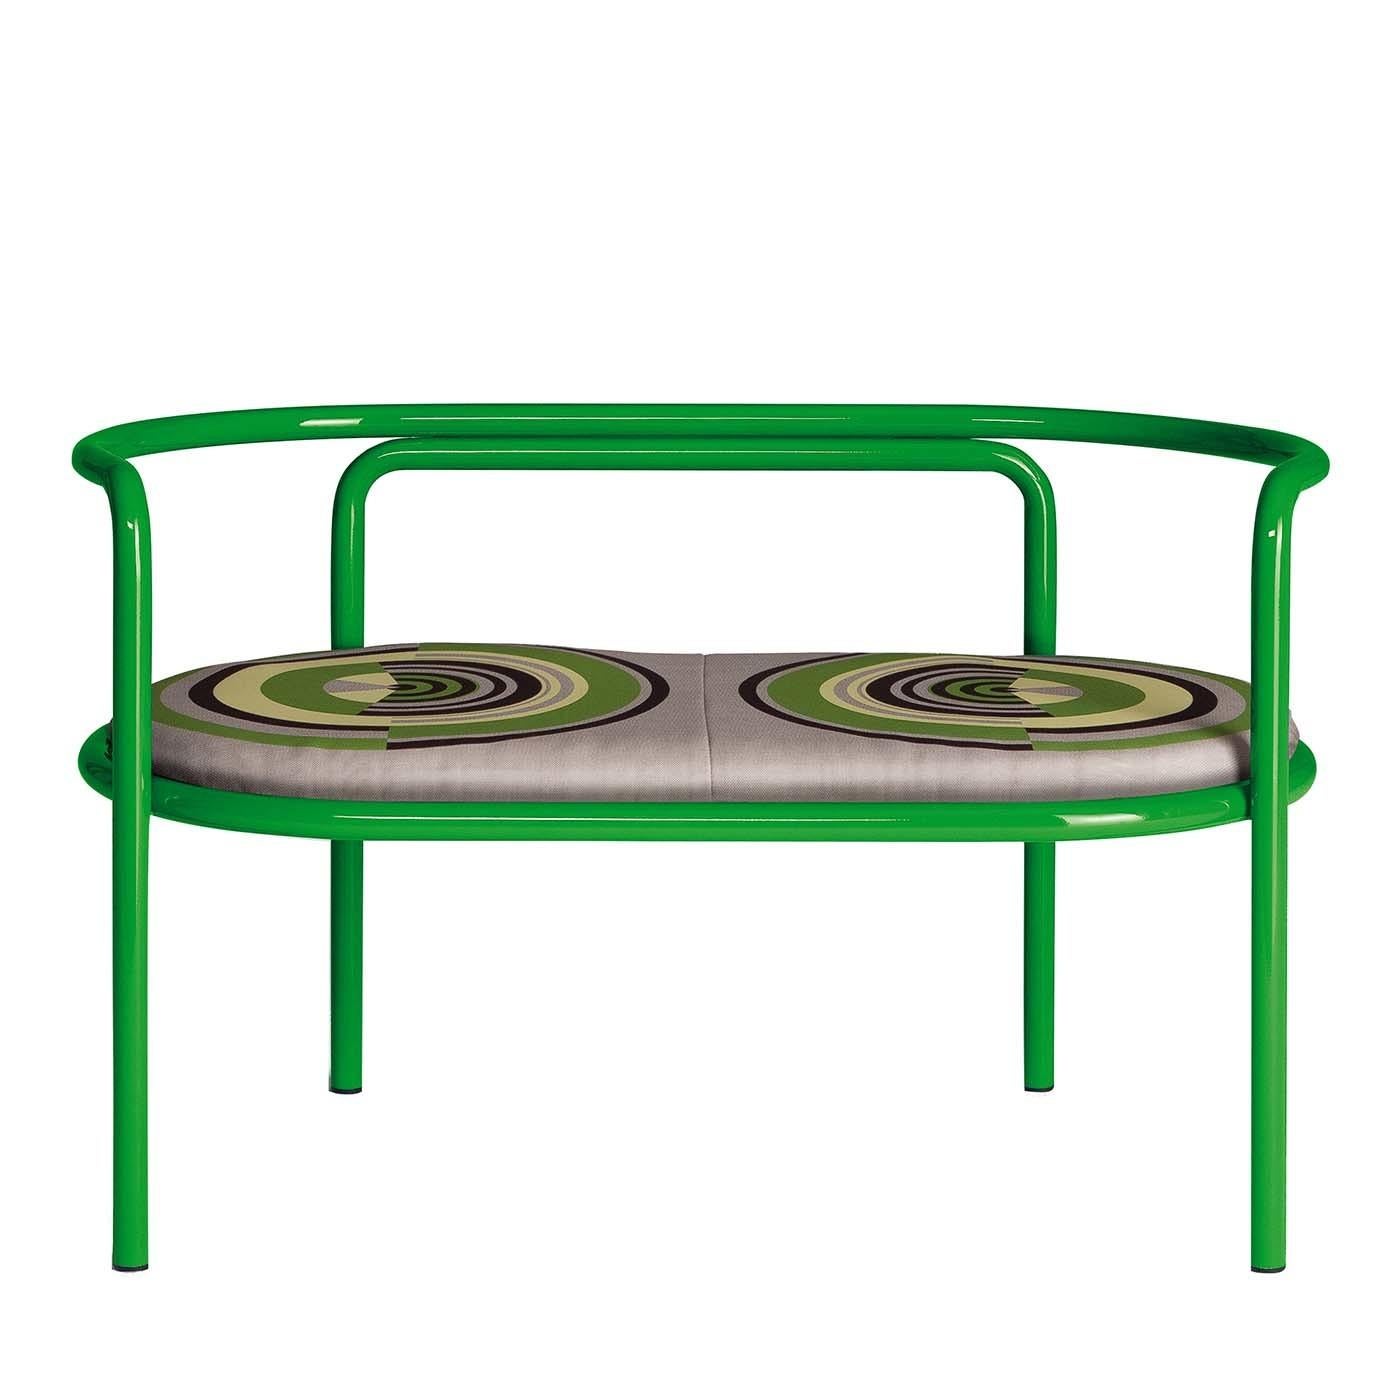 Hand-Crafted Locus Solus Green Loveseat by Gae Aulenti